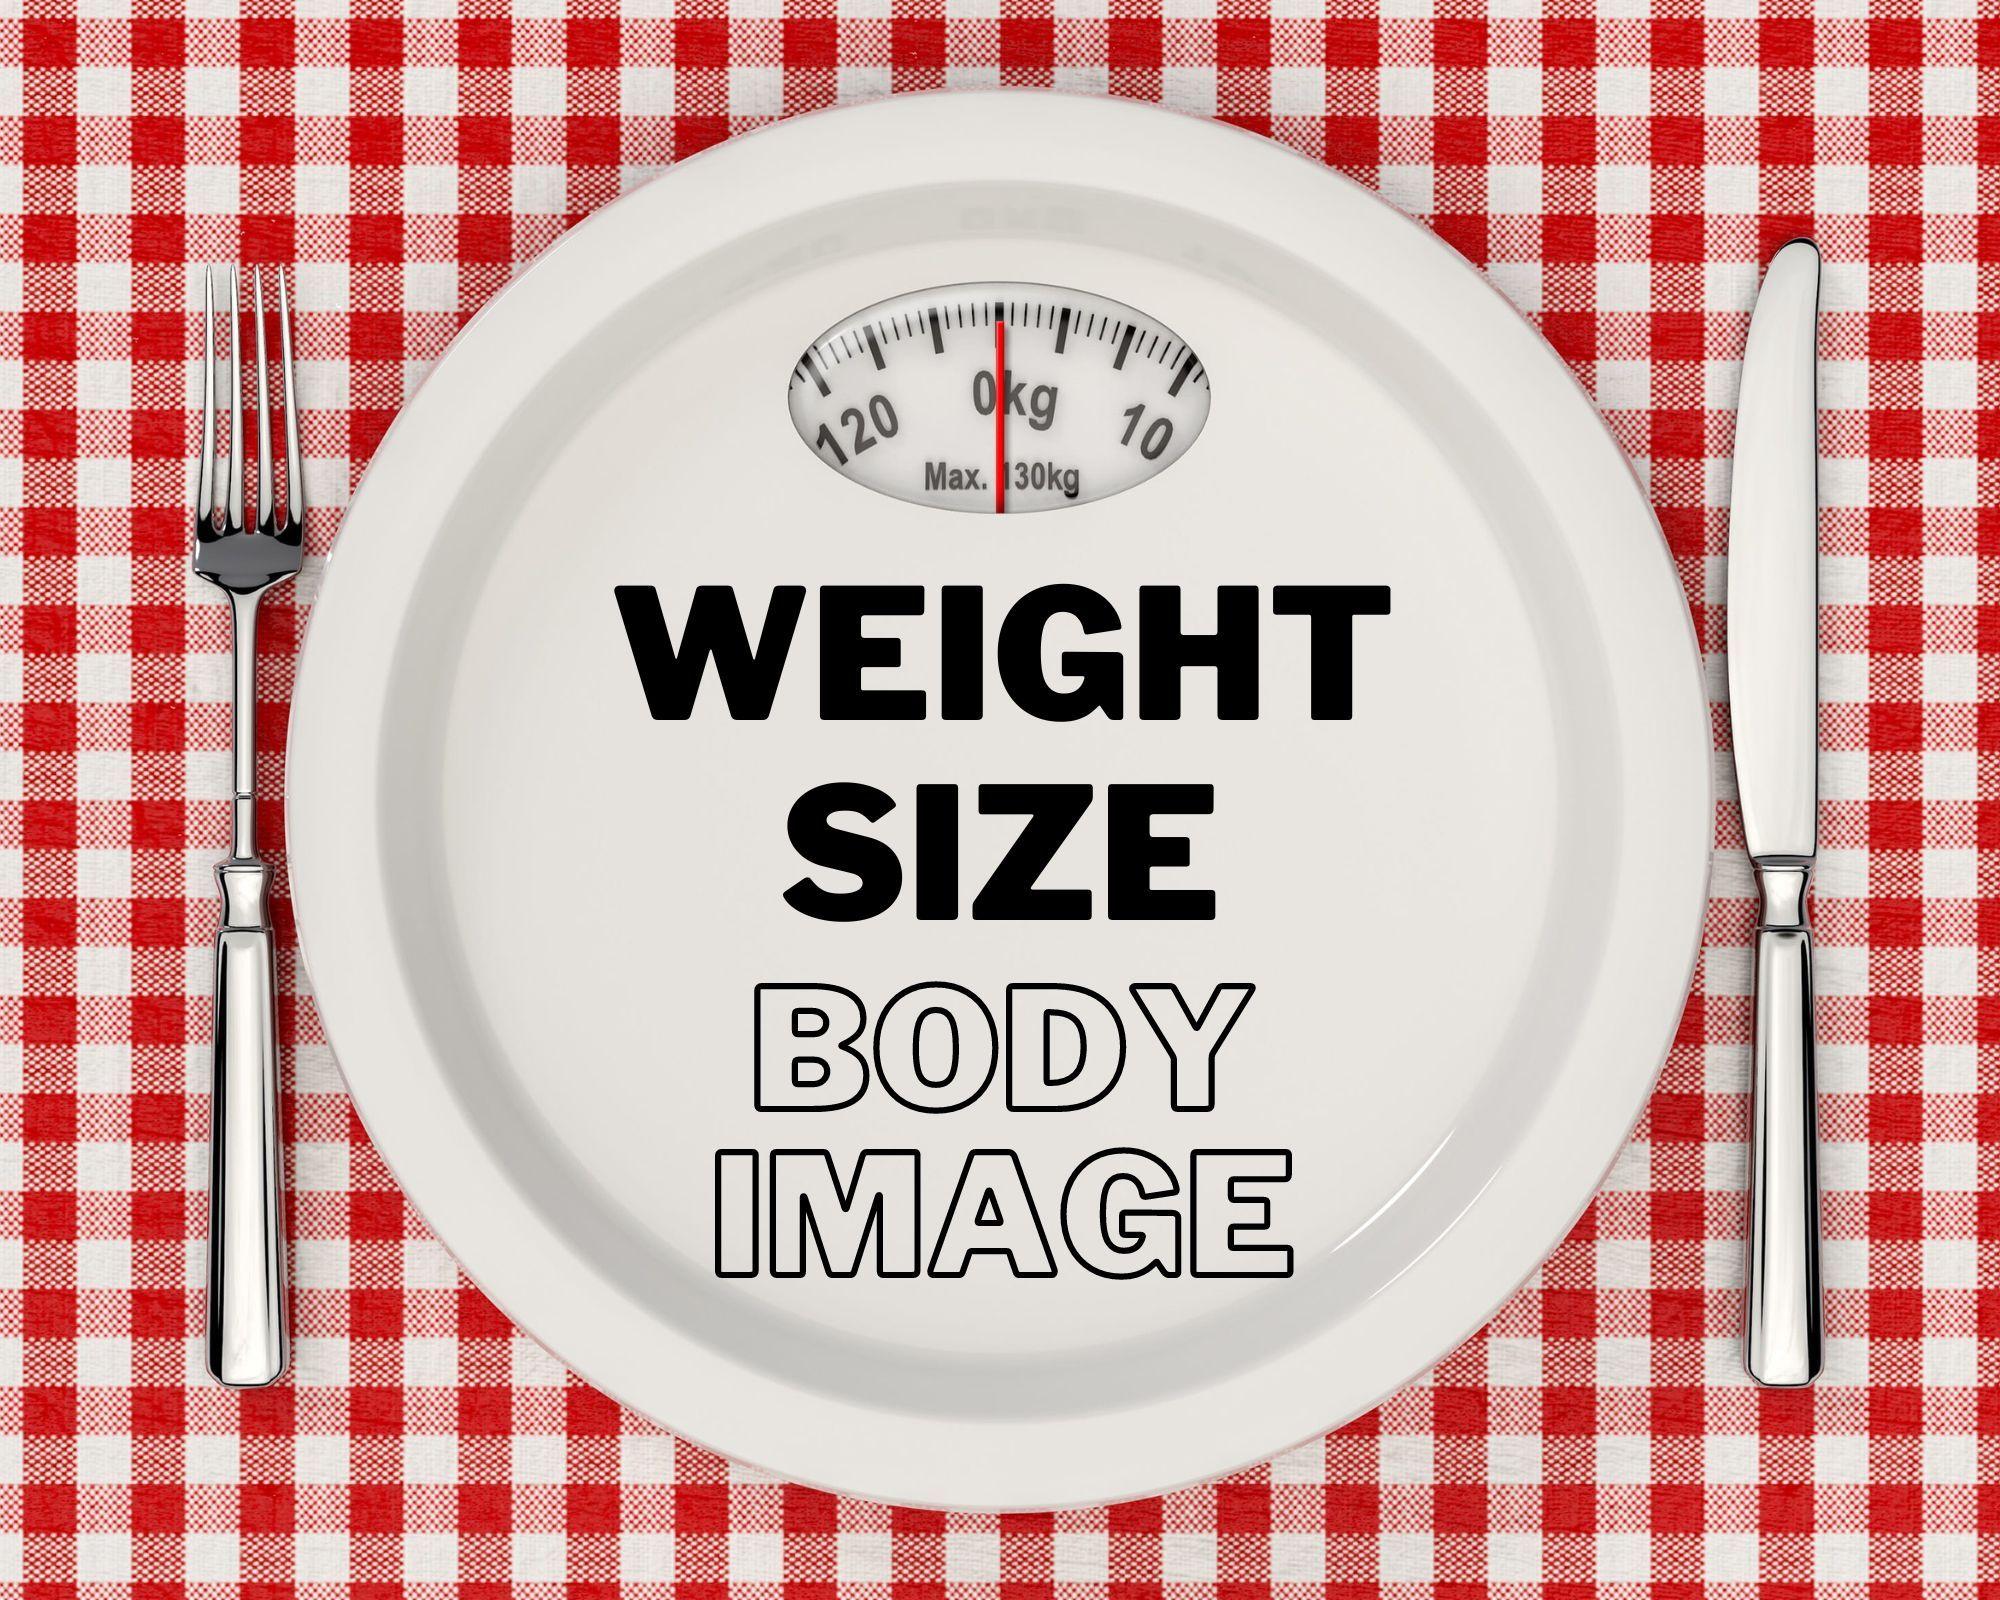 Weight, Size, And Body Image